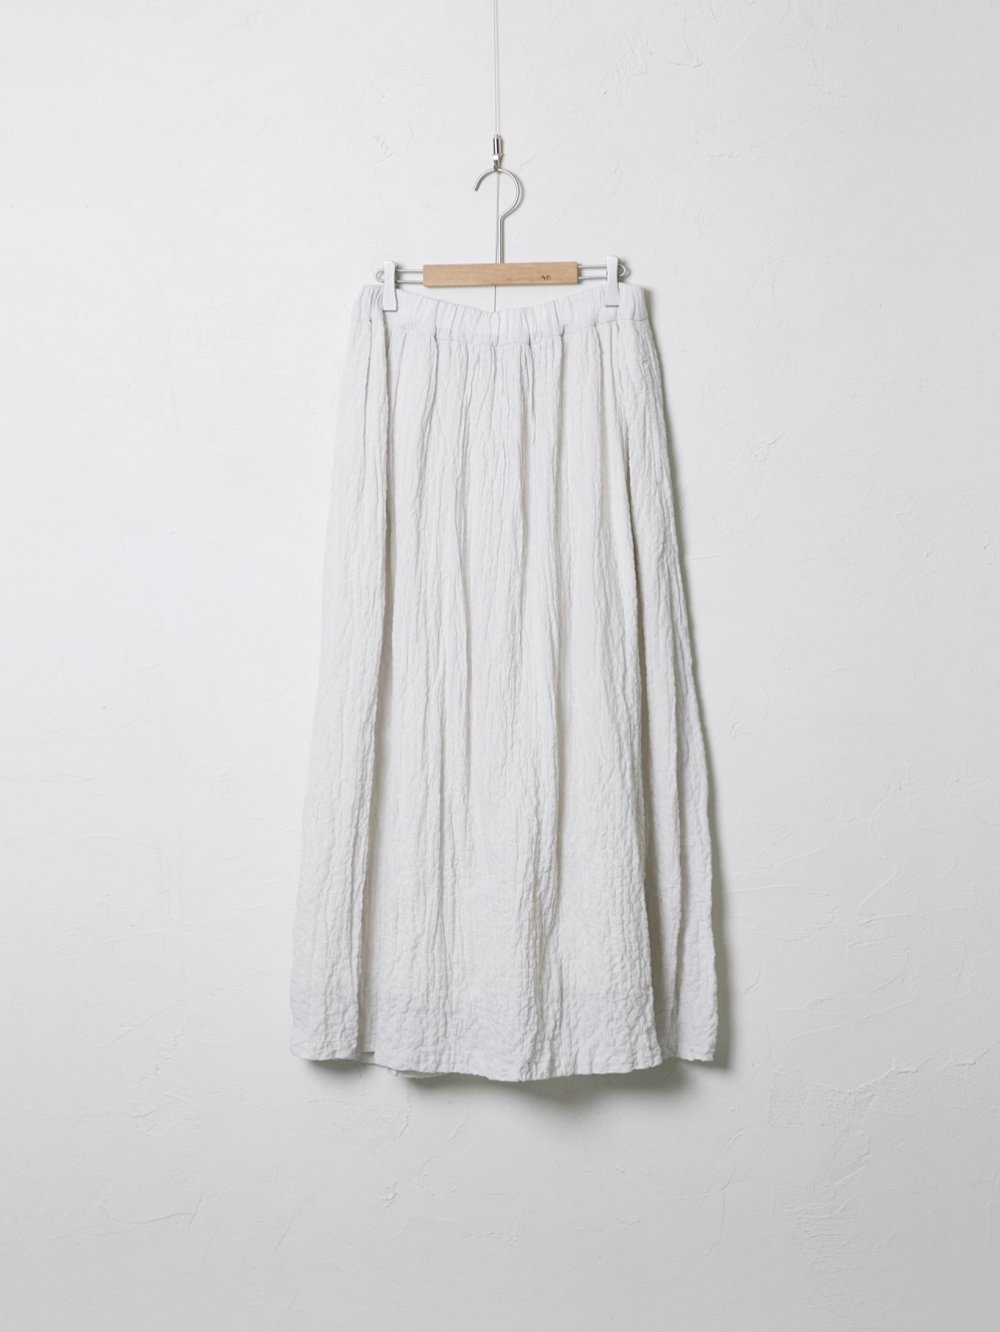 Airy Linen Rayon 裏付きギャザースカート